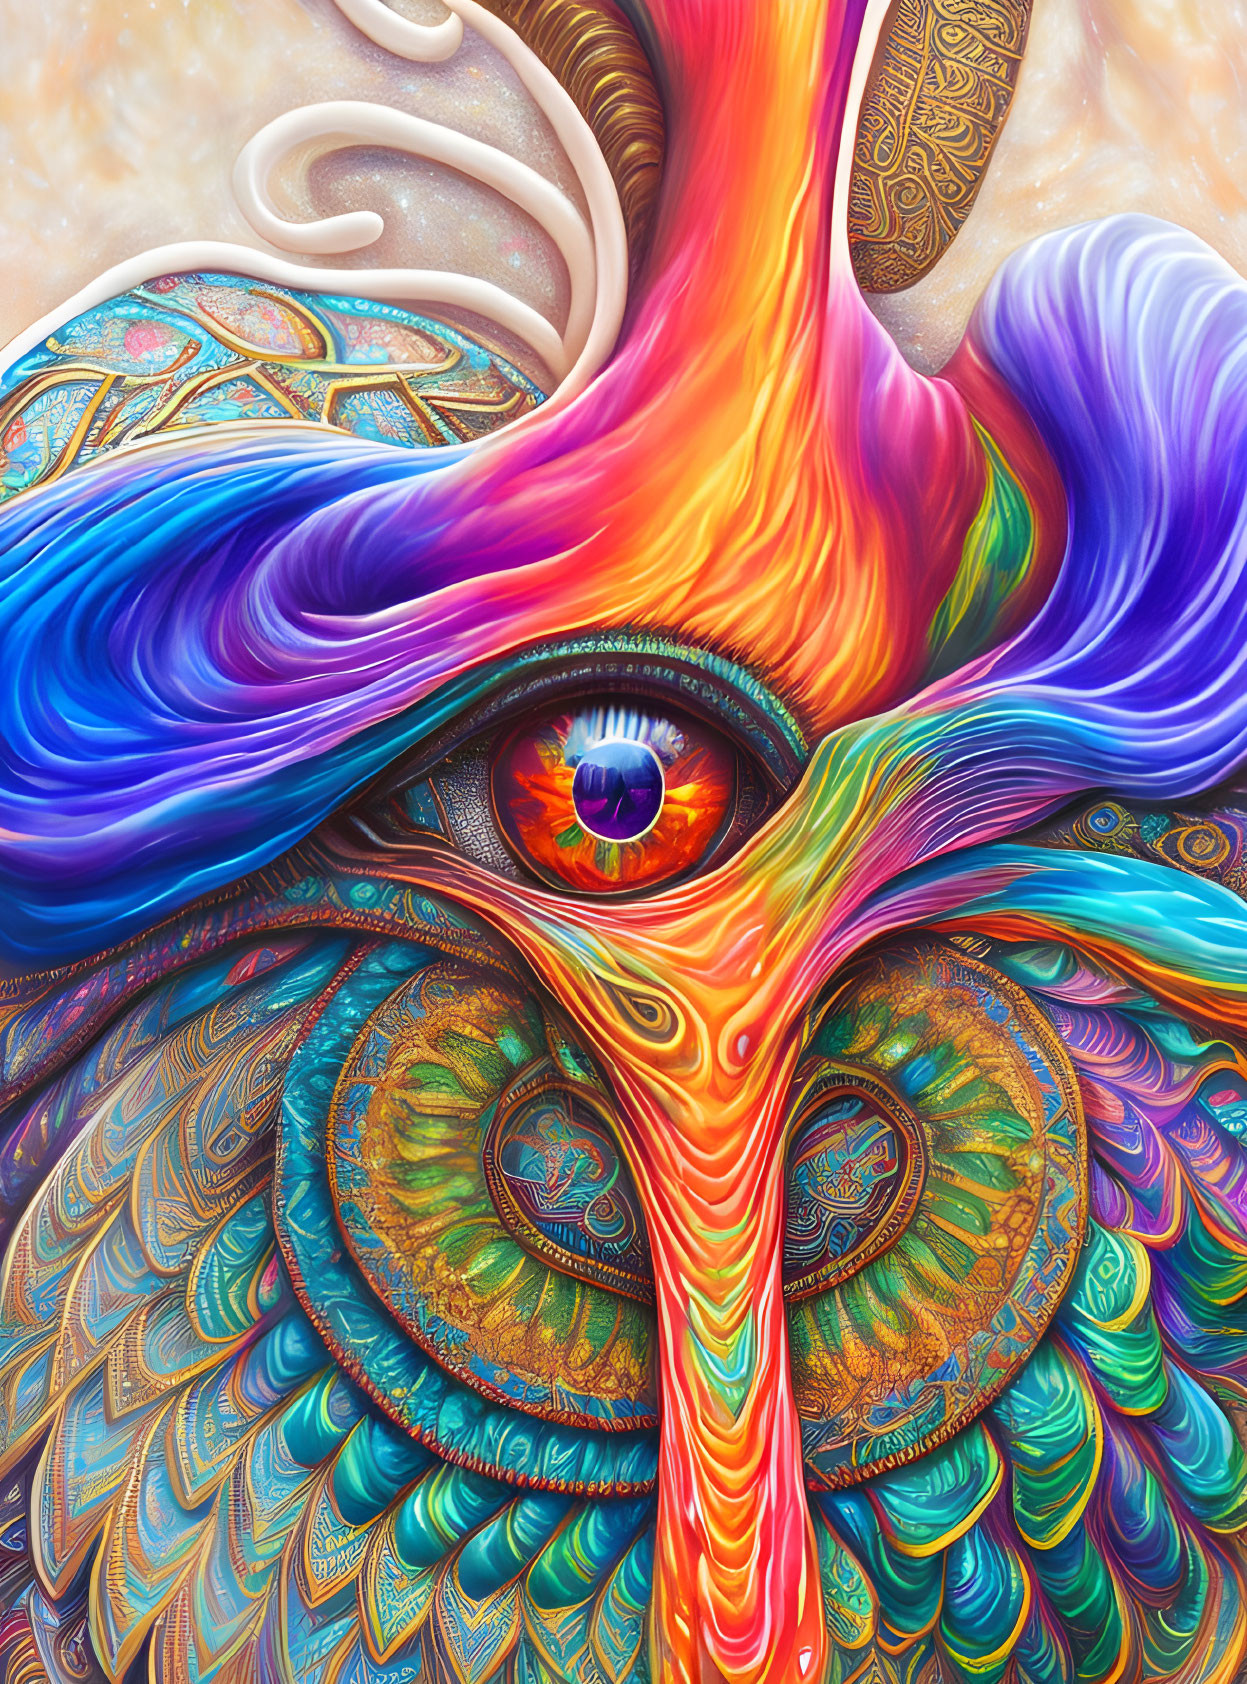 Colorful Psychedelic Eye Artwork with Feathers and Swirls